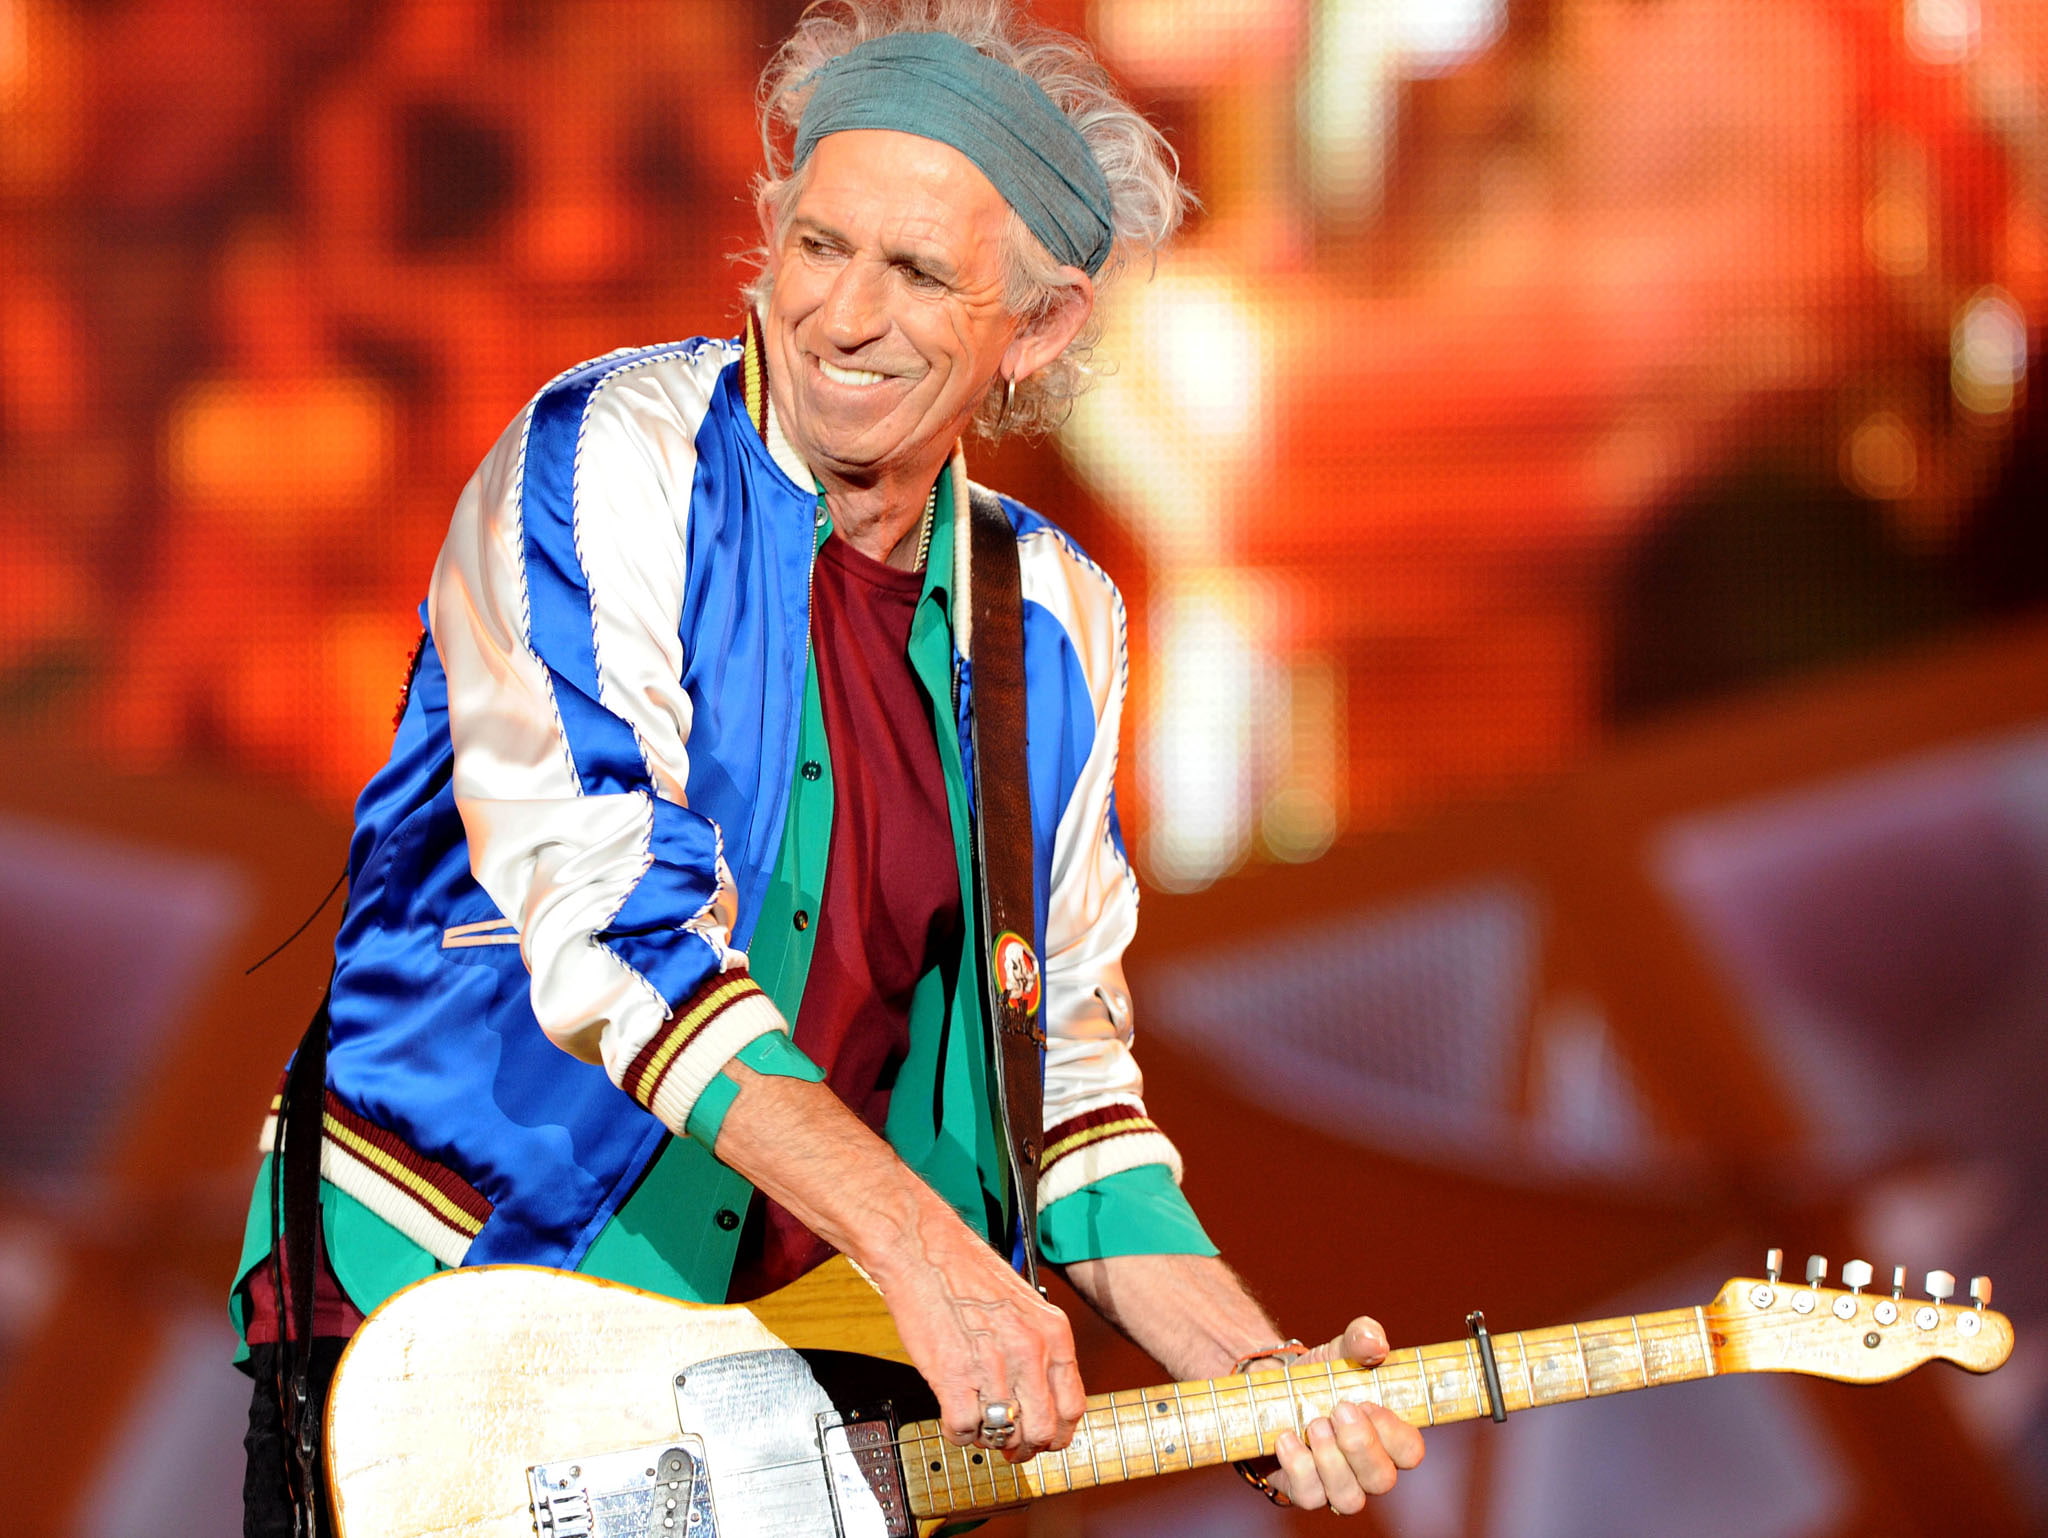 Keith Richards, The Rolling Stones, Guitarist